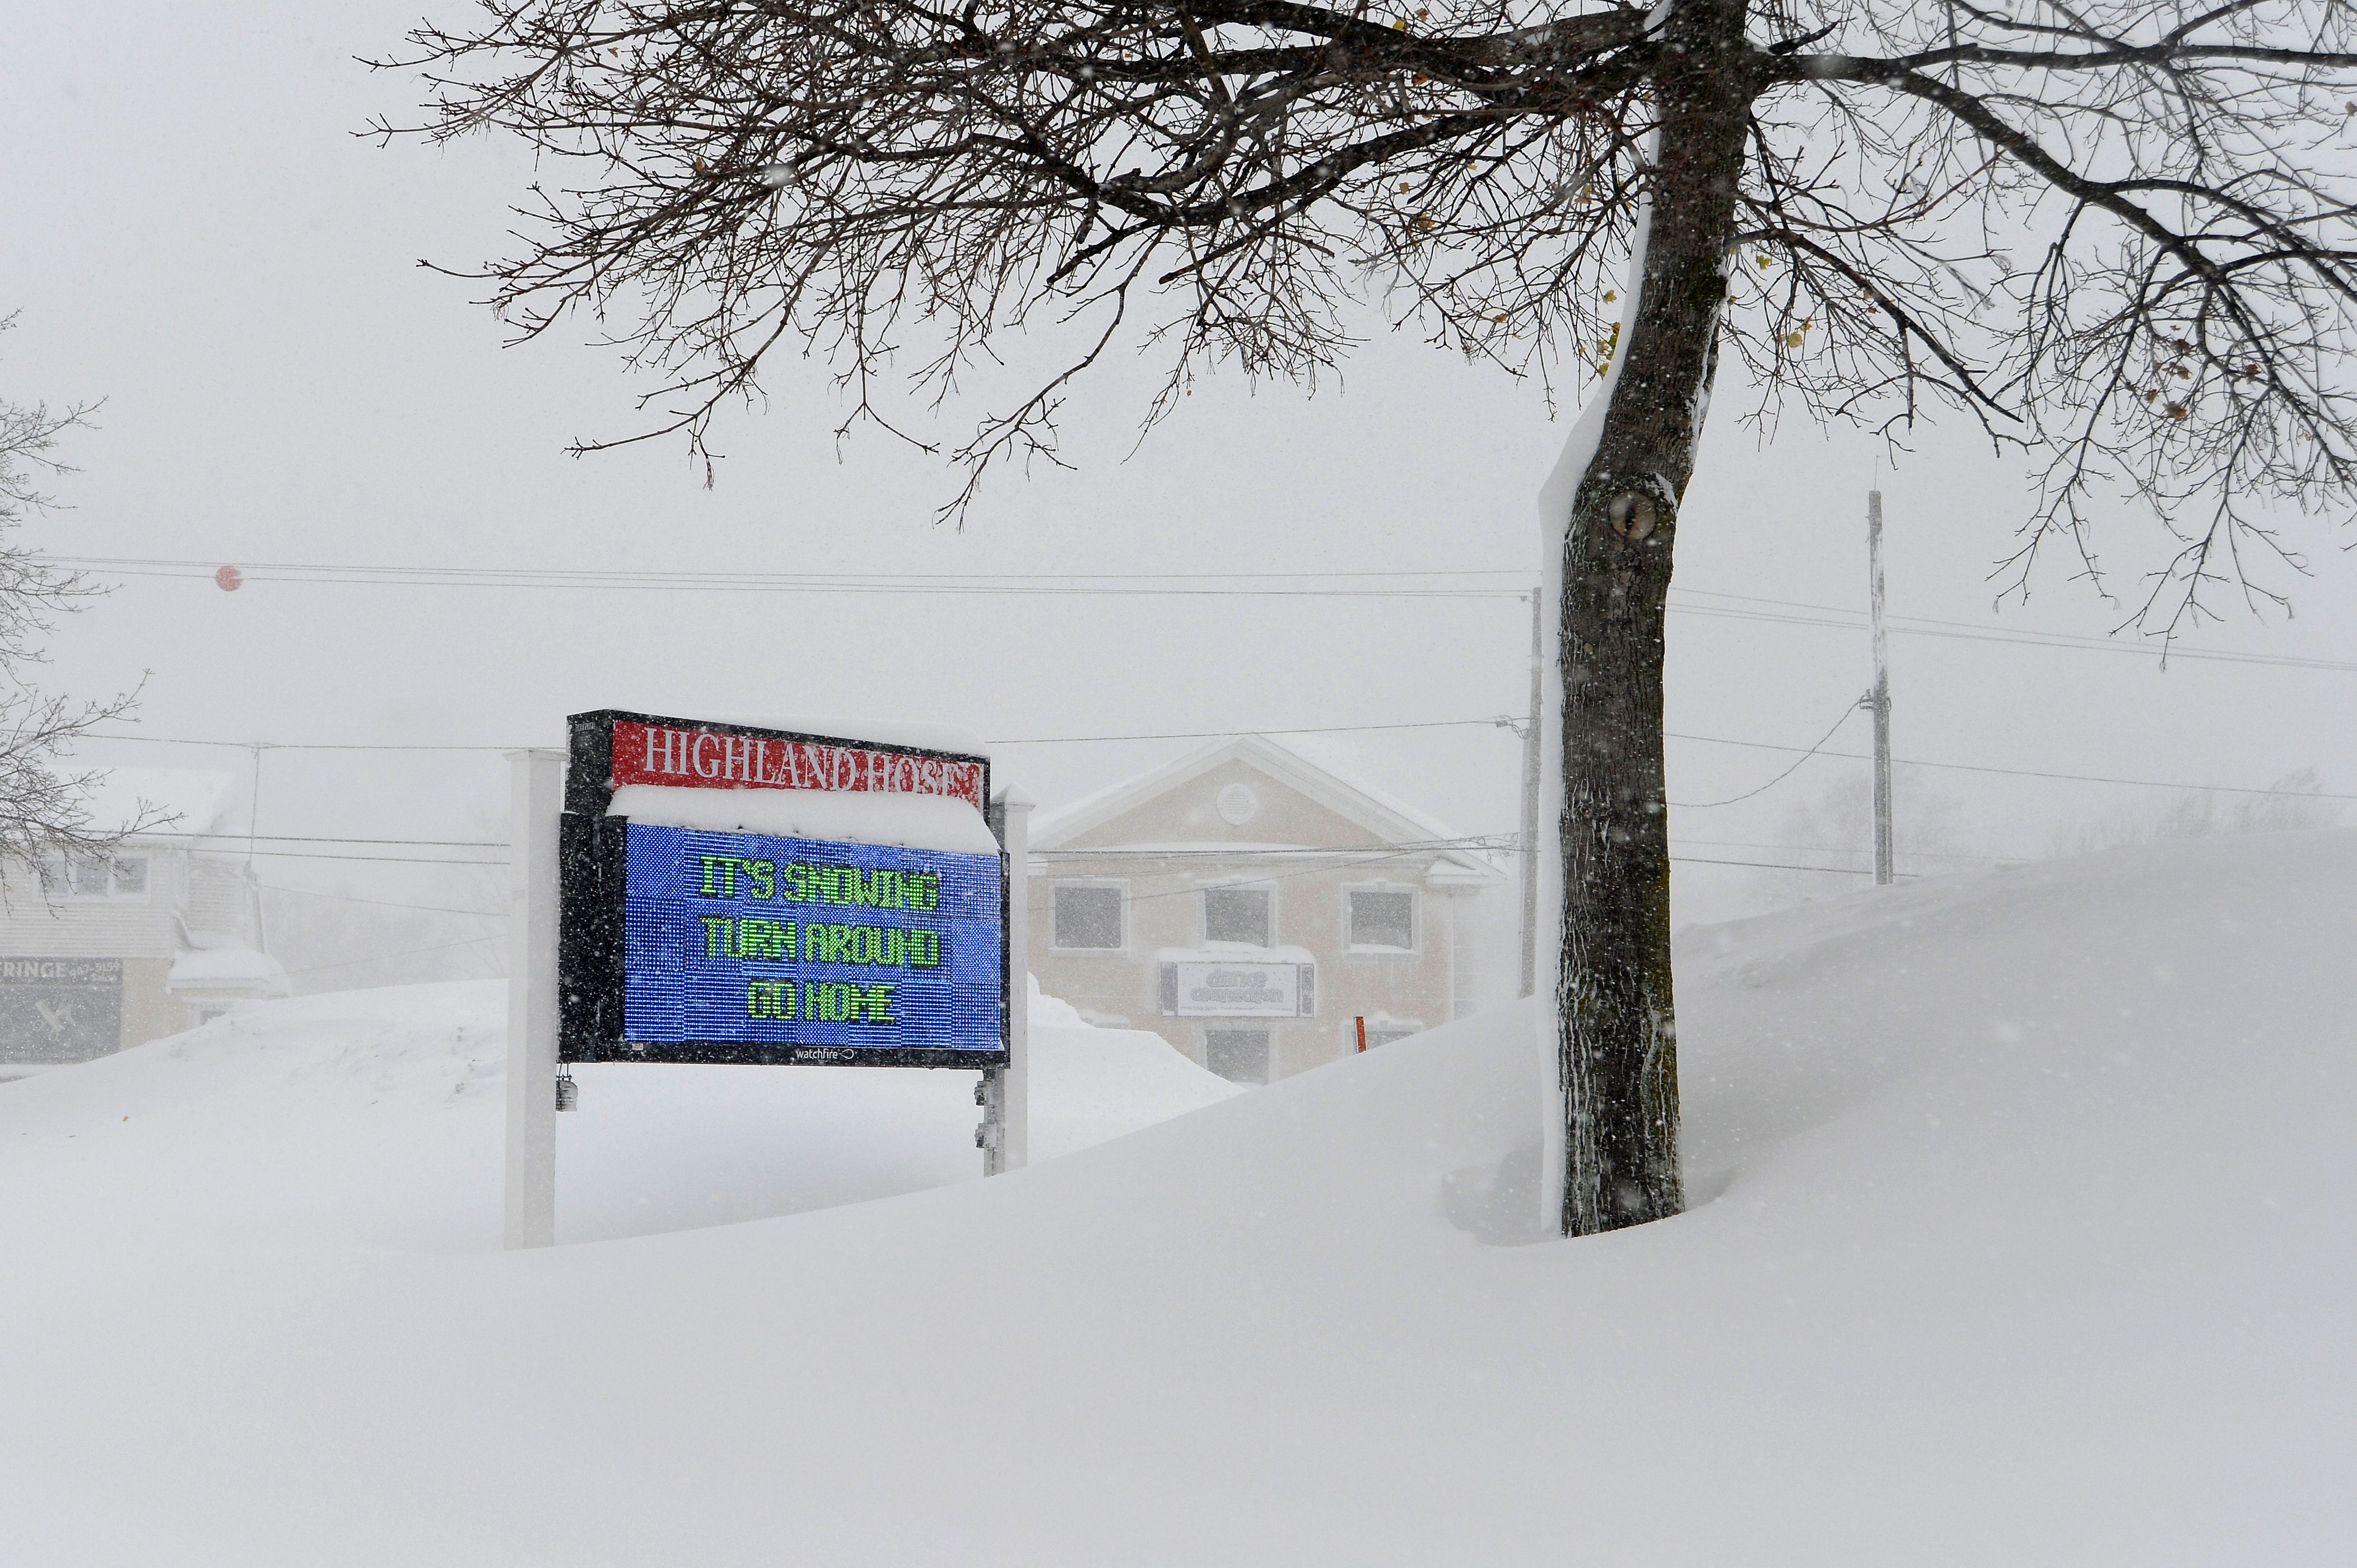 Buffalo snow storm Snowfall totals, pictures, forecast so far